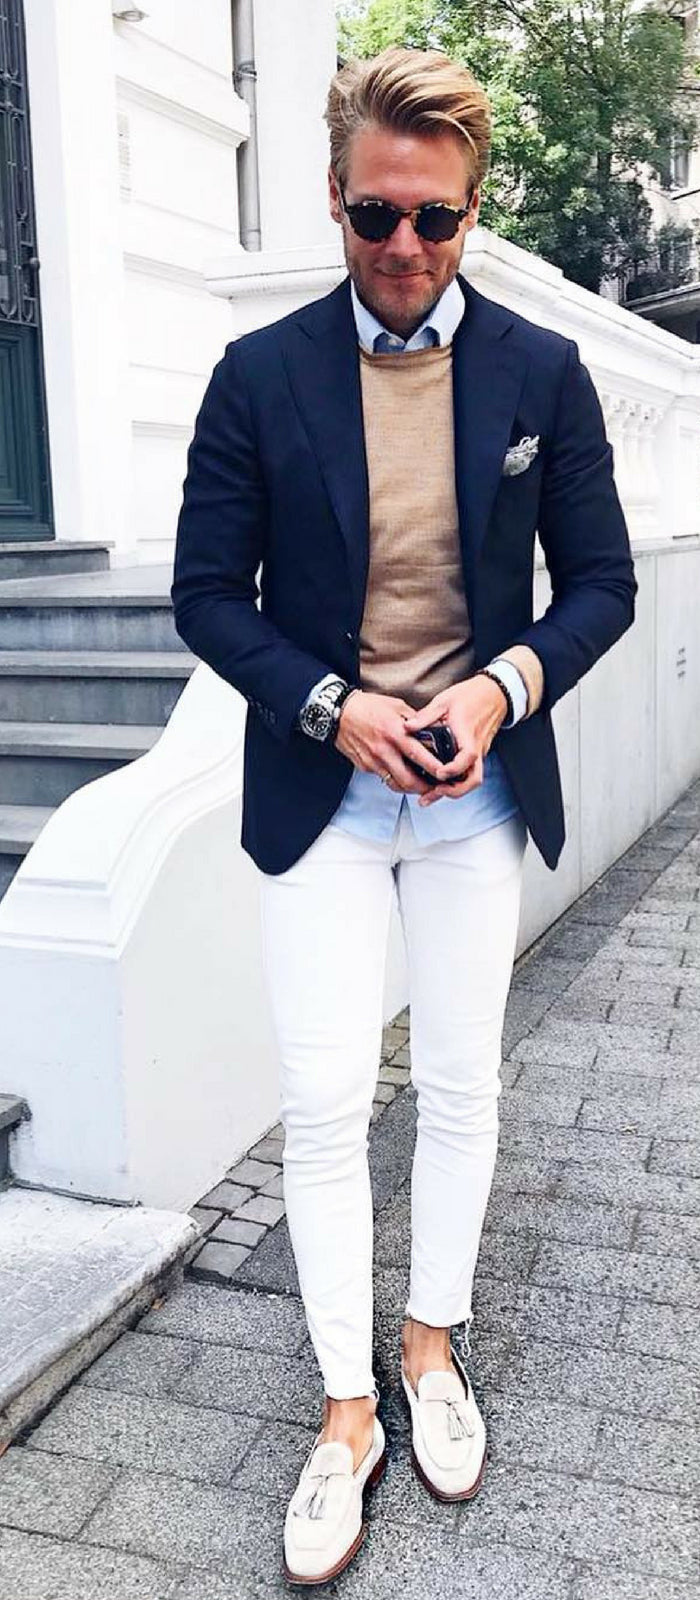 How To Wear A Blazer Jacket Like A Street Style Star – LIFESTYLE BY PS